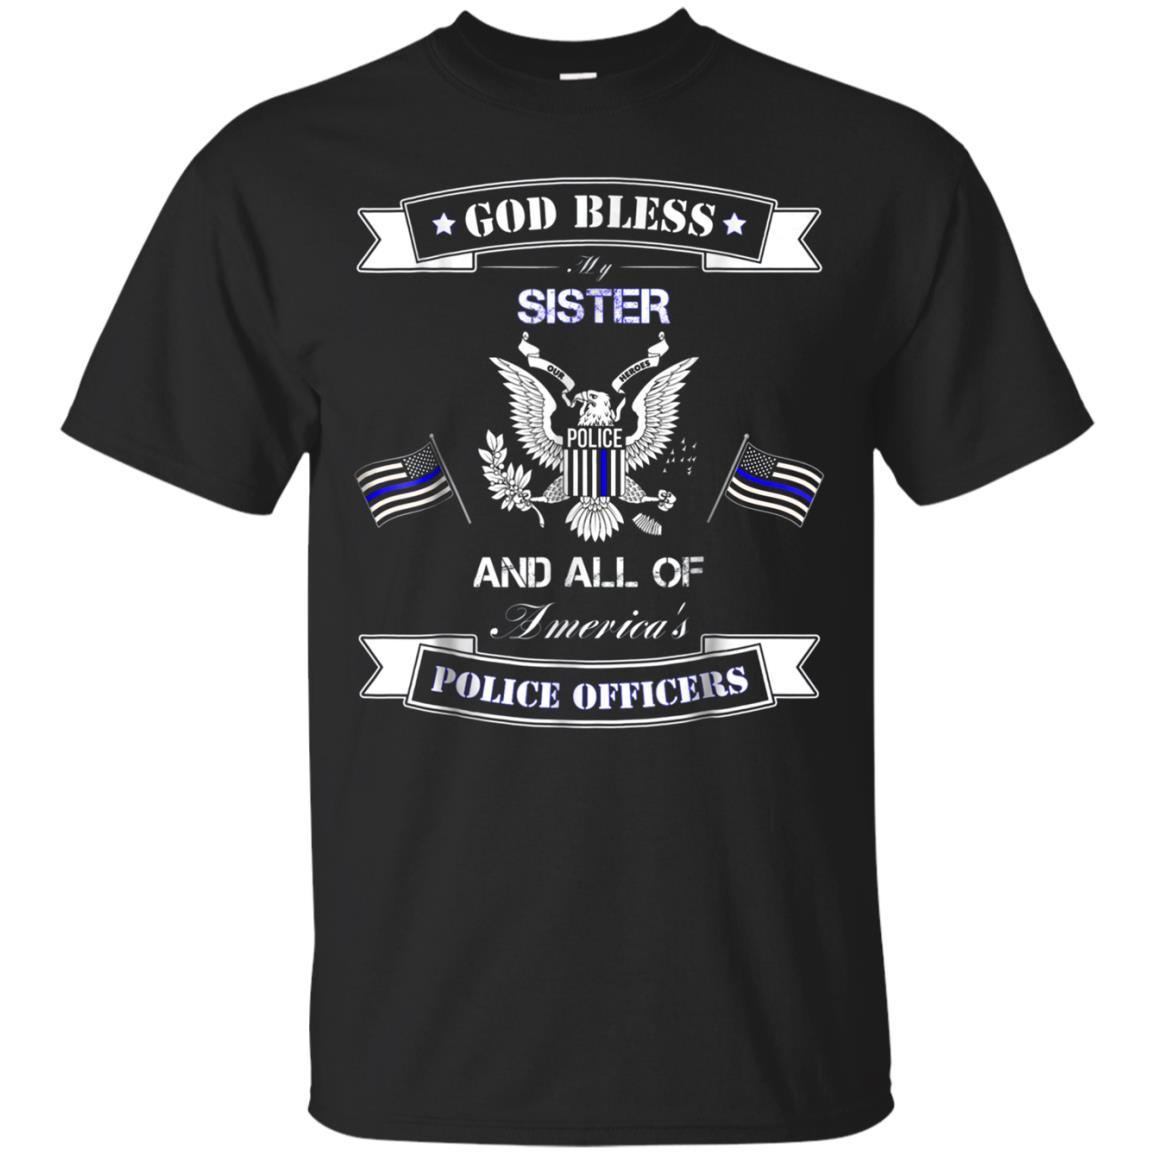 I Back The Blue For My Sister Shirt Police Officer Tee